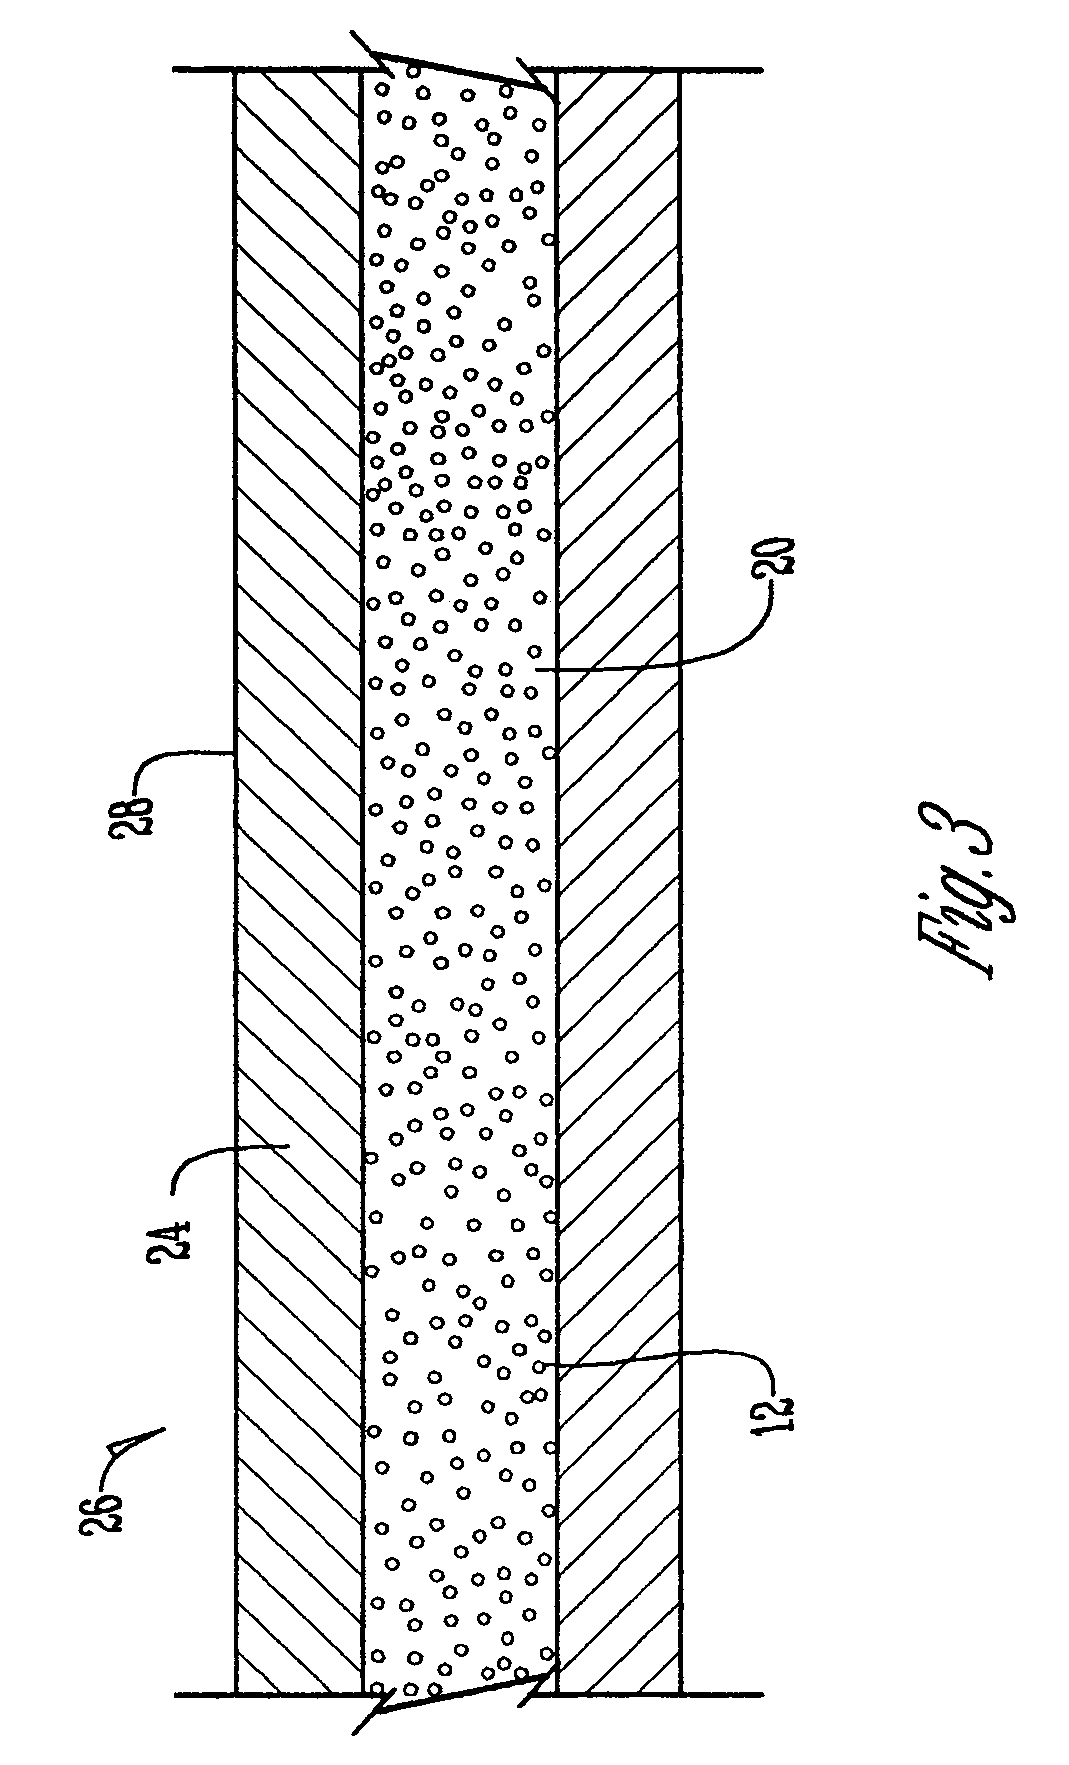 Layered nuclear-cored battery